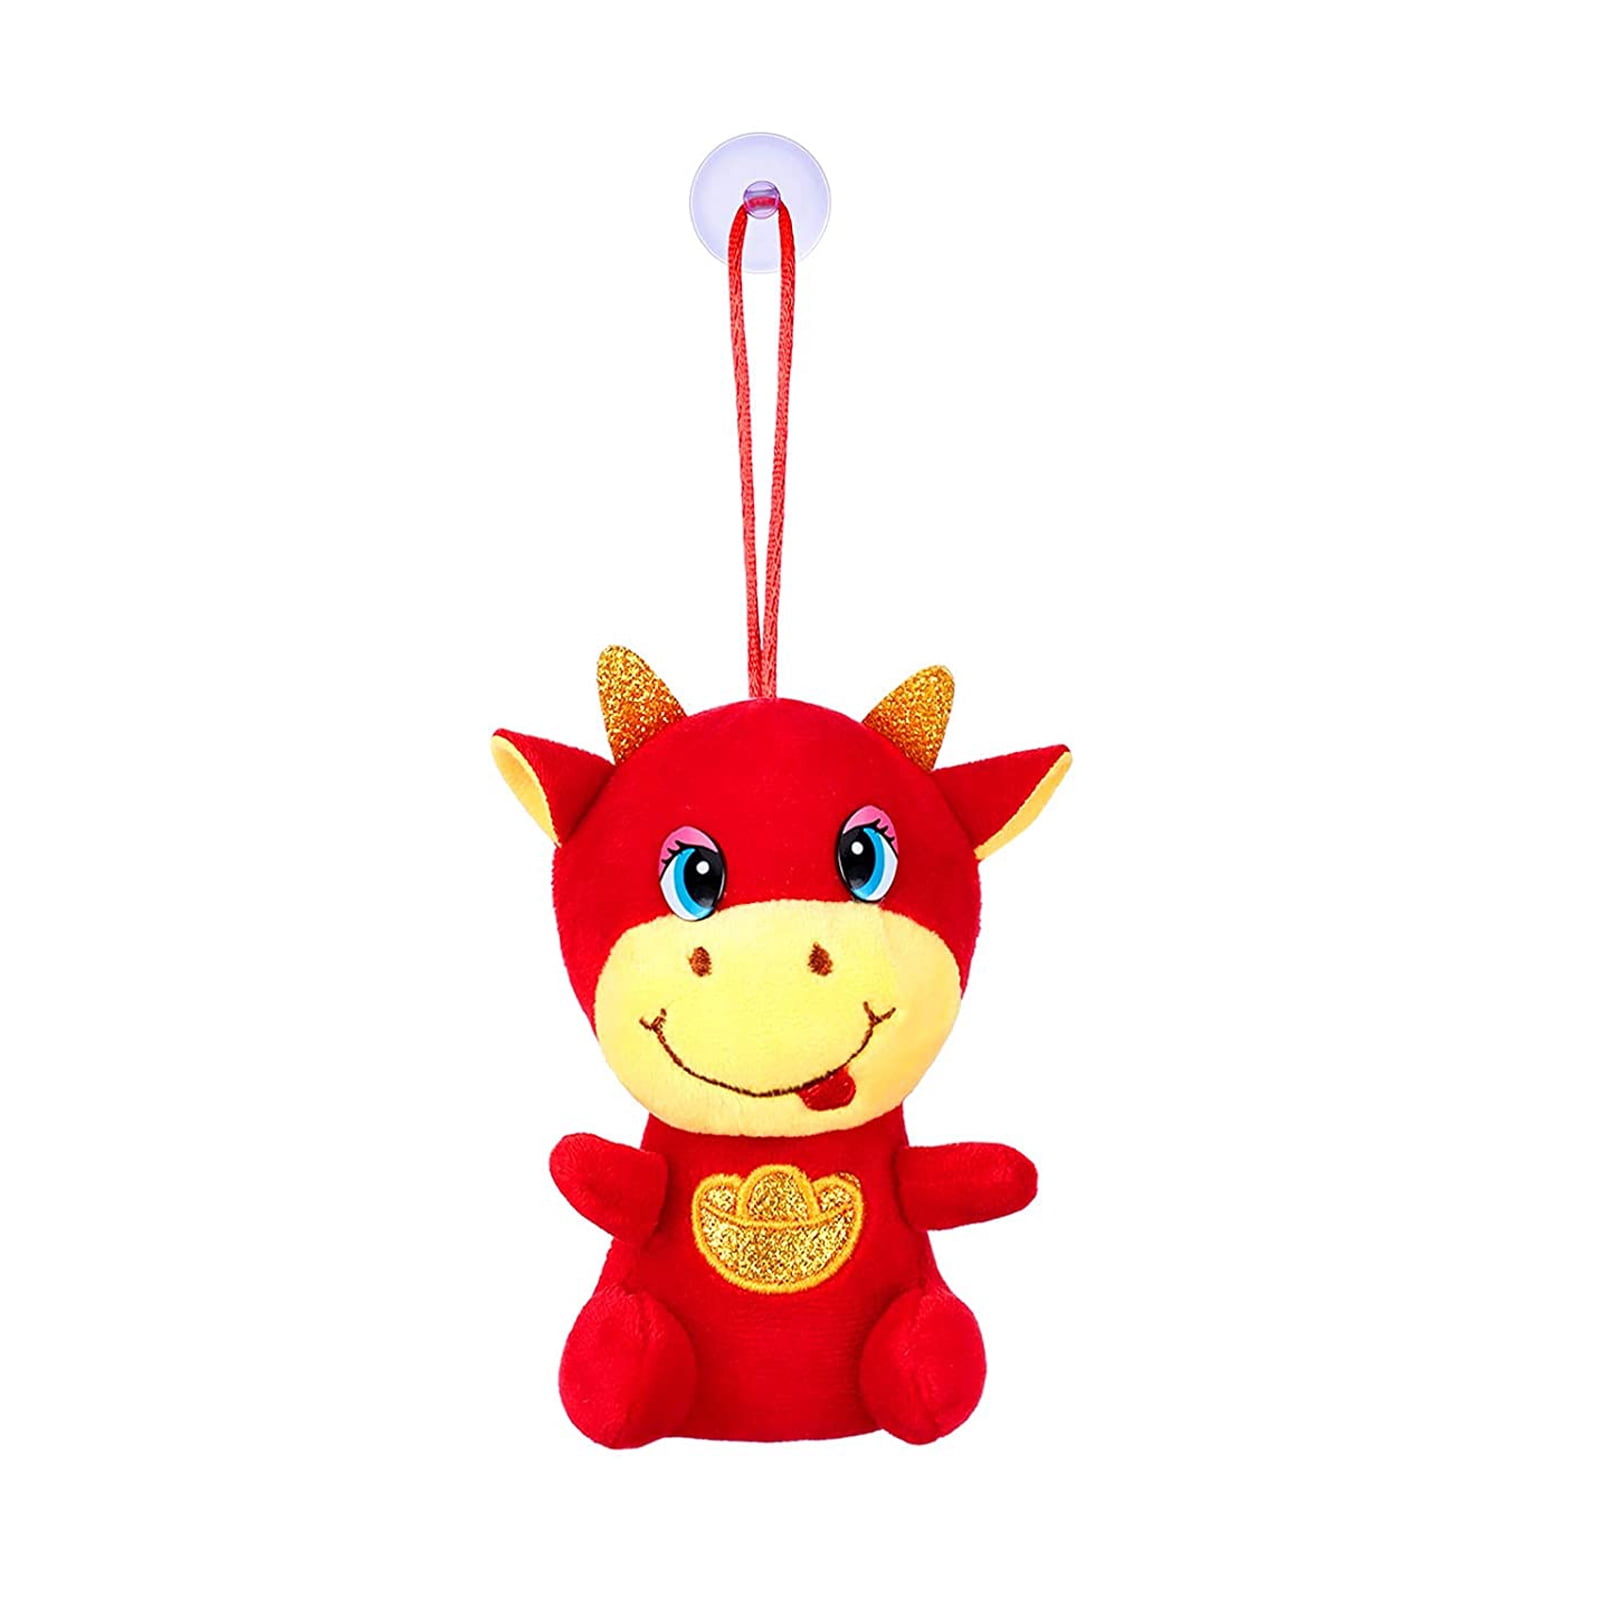 AIHOME 2021 Chinese New Year Plush Toy Year of the Ox Mascot Plushie